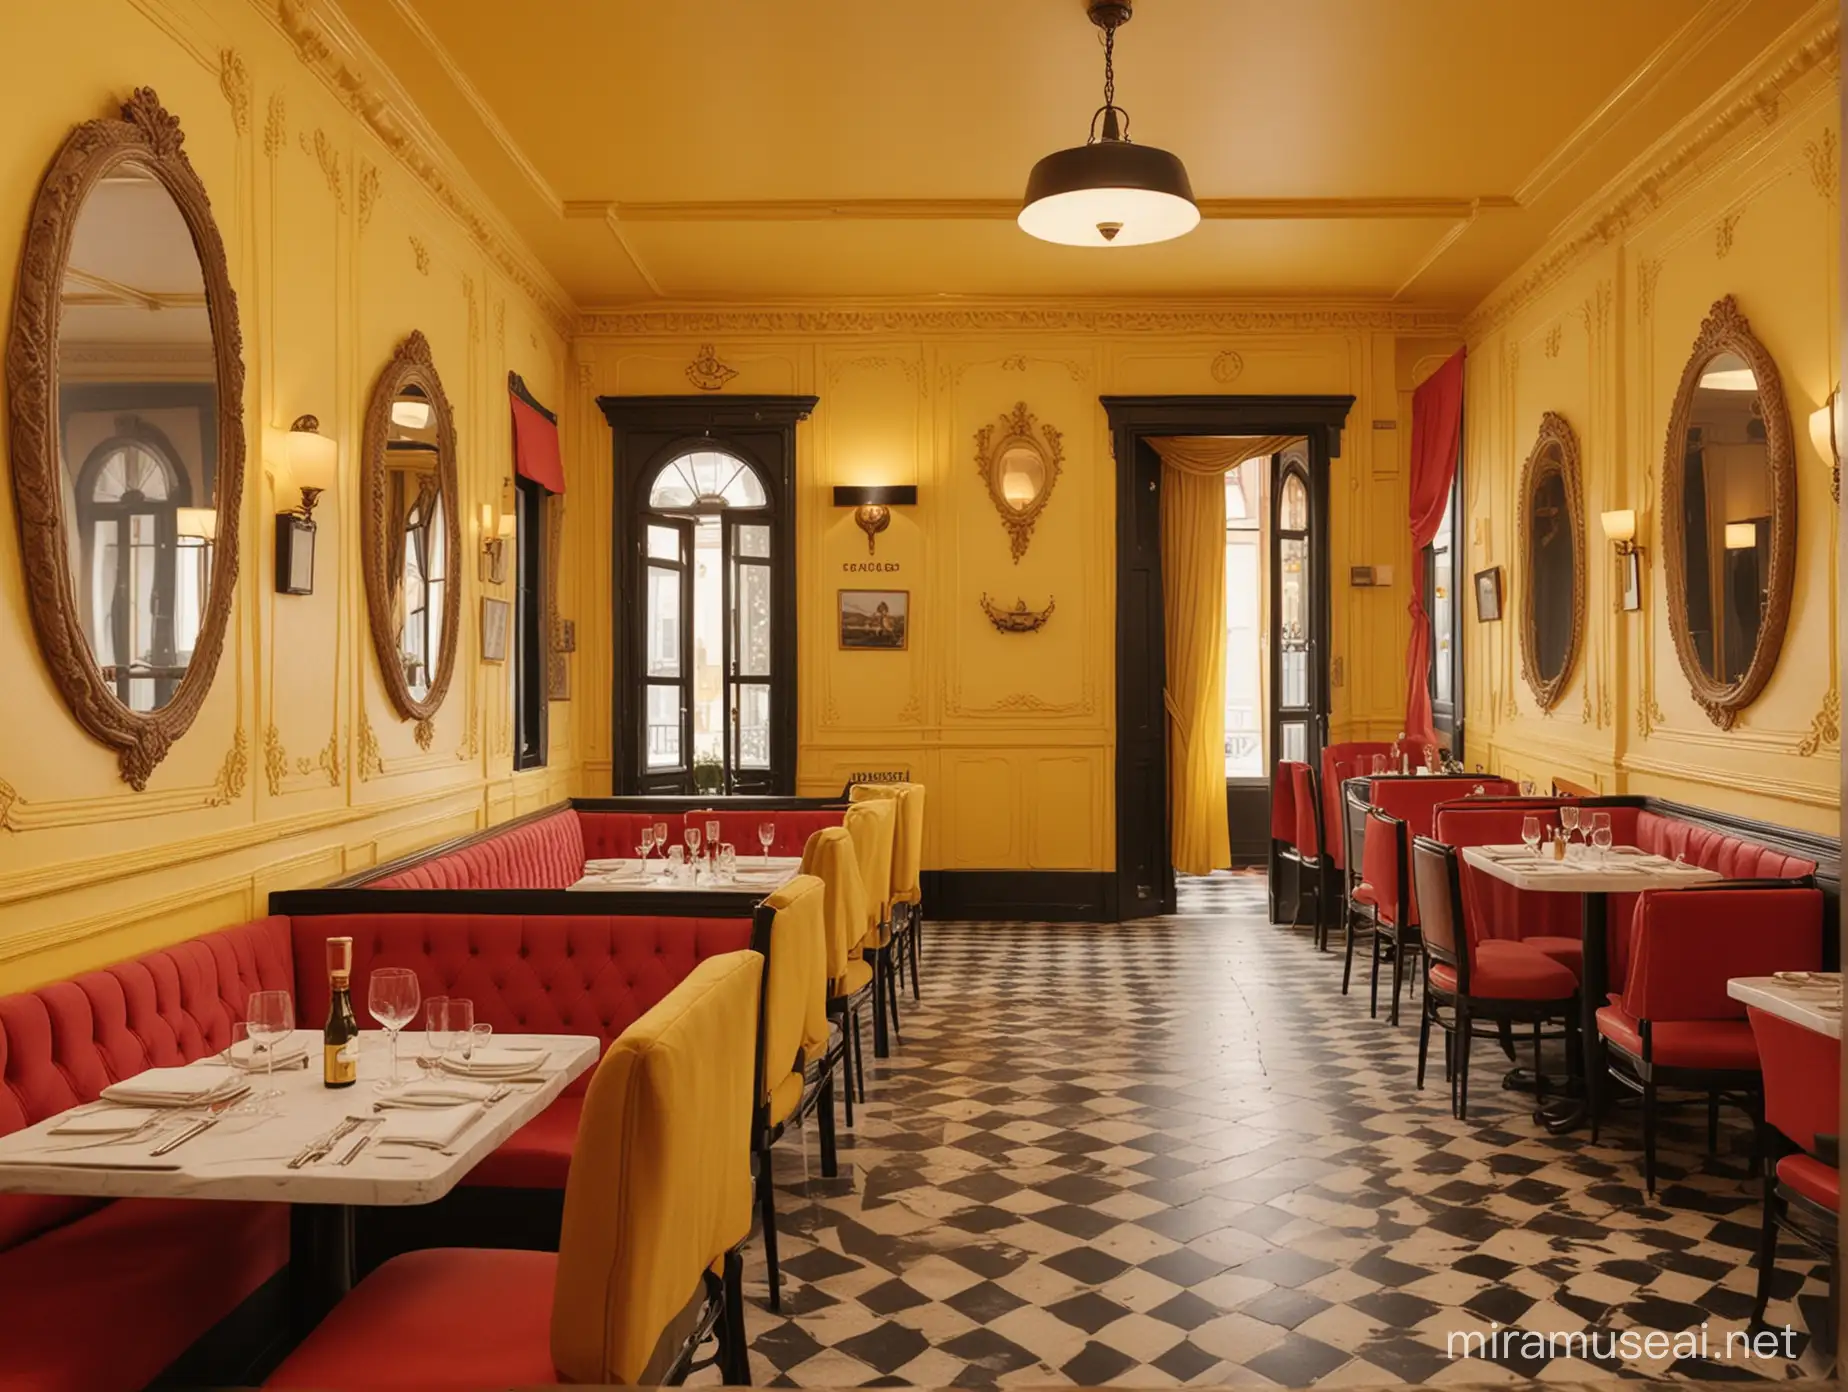 Elegant French Restaurant Scene with Wes Anderson Style Ambiance